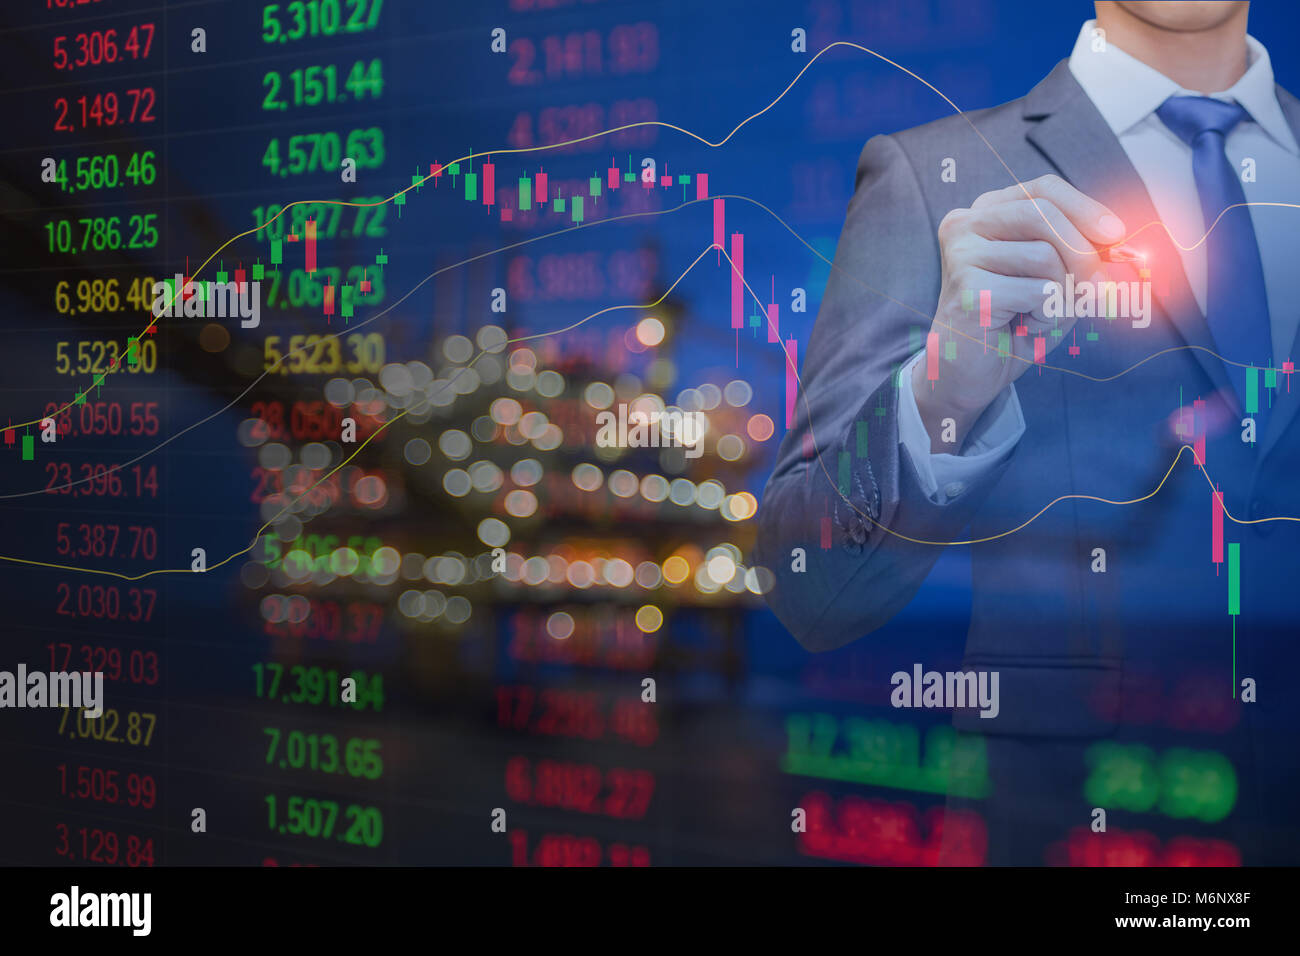 Graph Of Stock Market Data And Financial With Indicator Pricing Display On Offshore Oil And Gas Processing Platform Background For World Energy And O Stock Photo Alamy